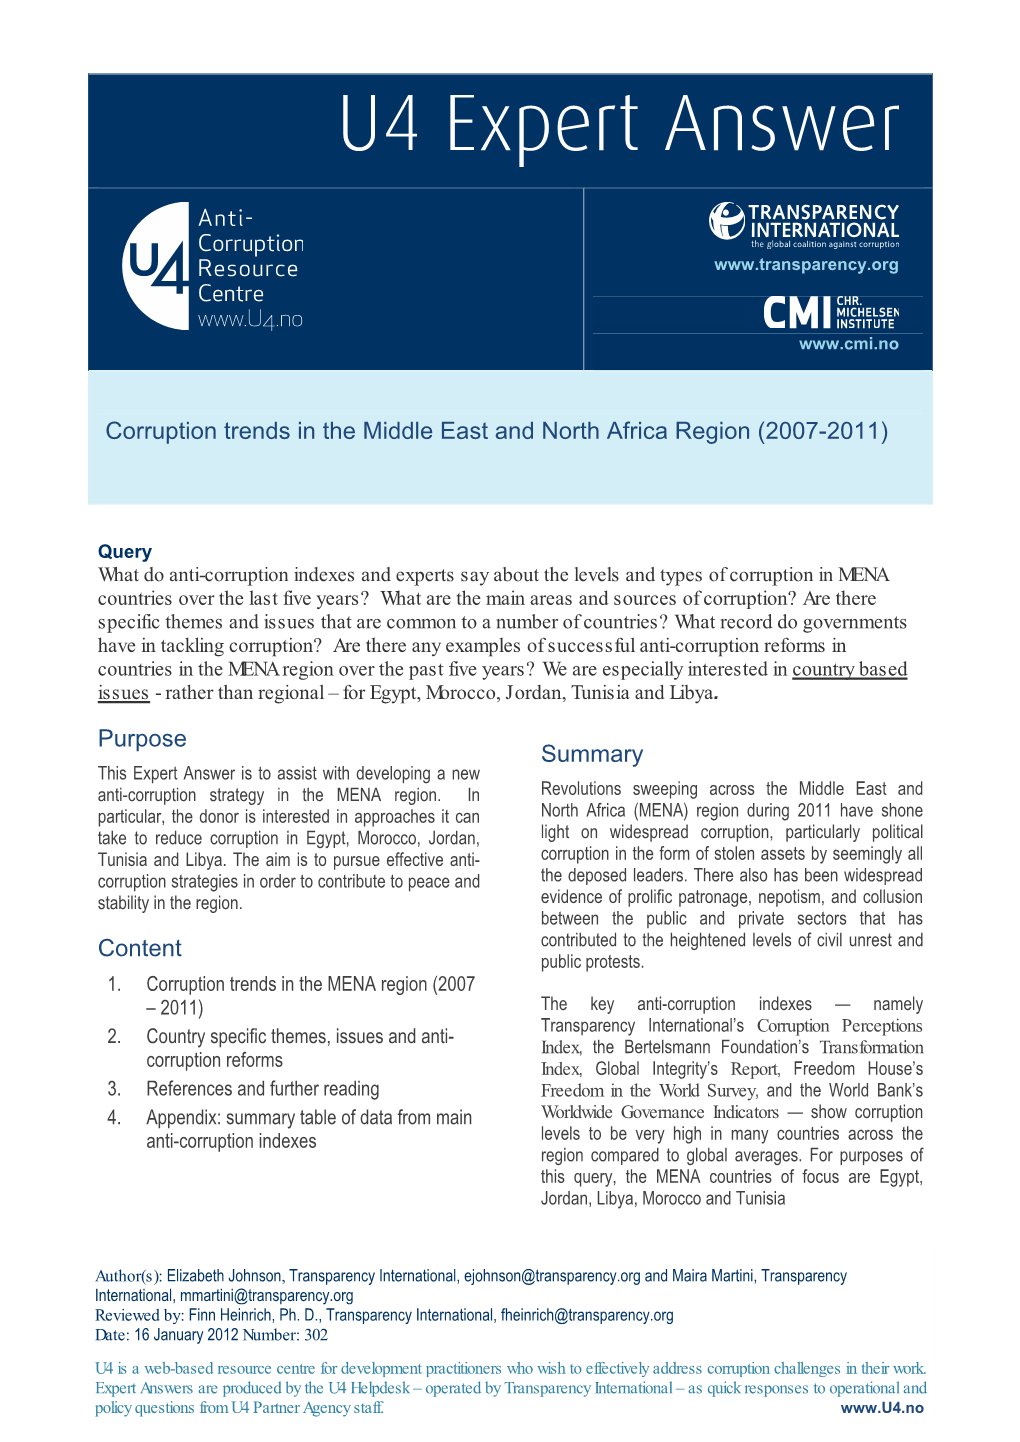 Corruption Trends in the Middle East and North Africa Region (2007-2011)